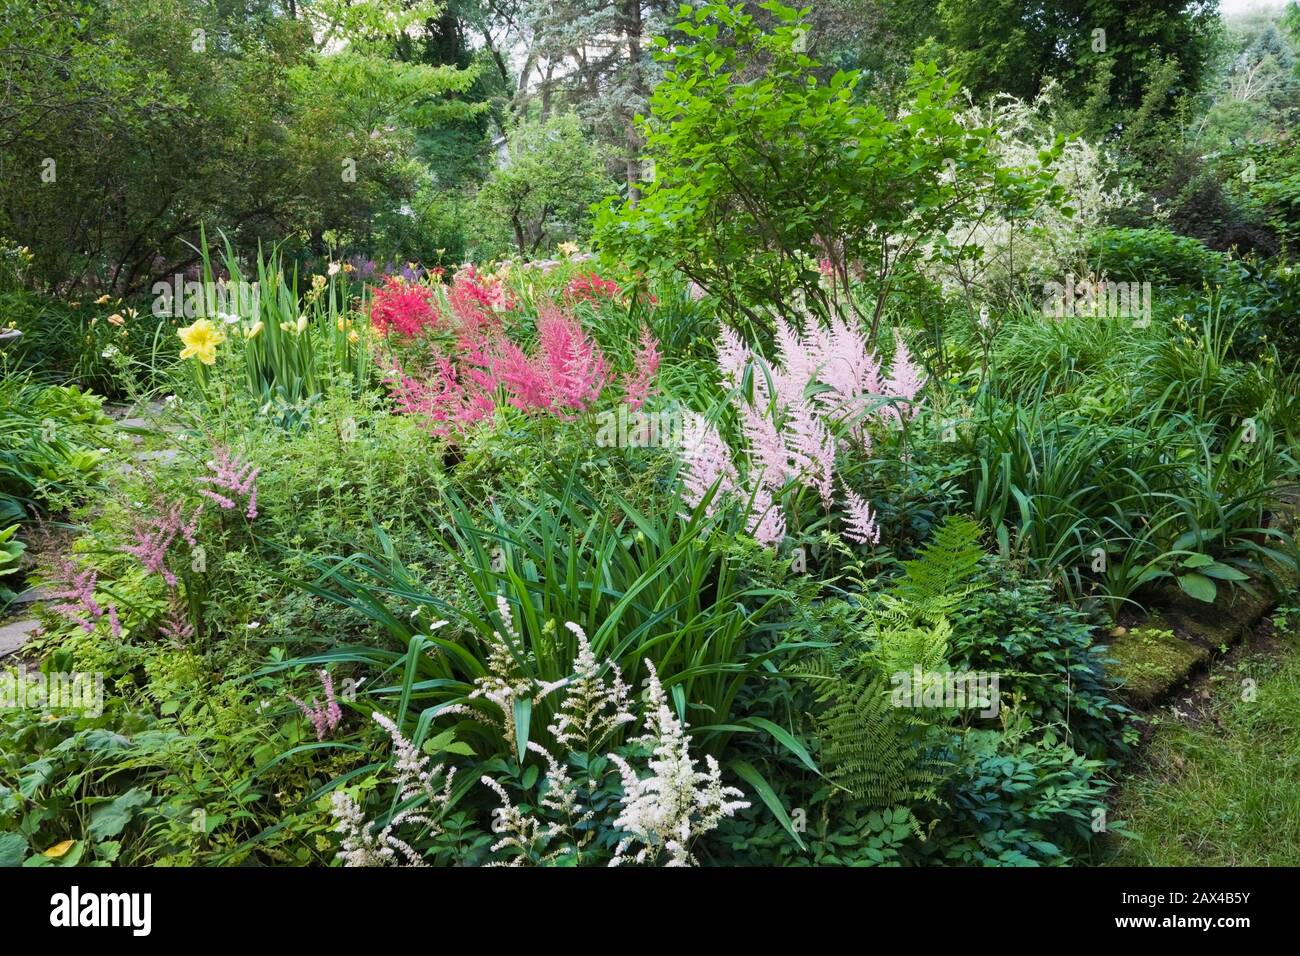 Border with white, pink and mauve Astilbes, yellow Hemerocallis - Daylily flowers in private backyard garden in summer Stock Photo